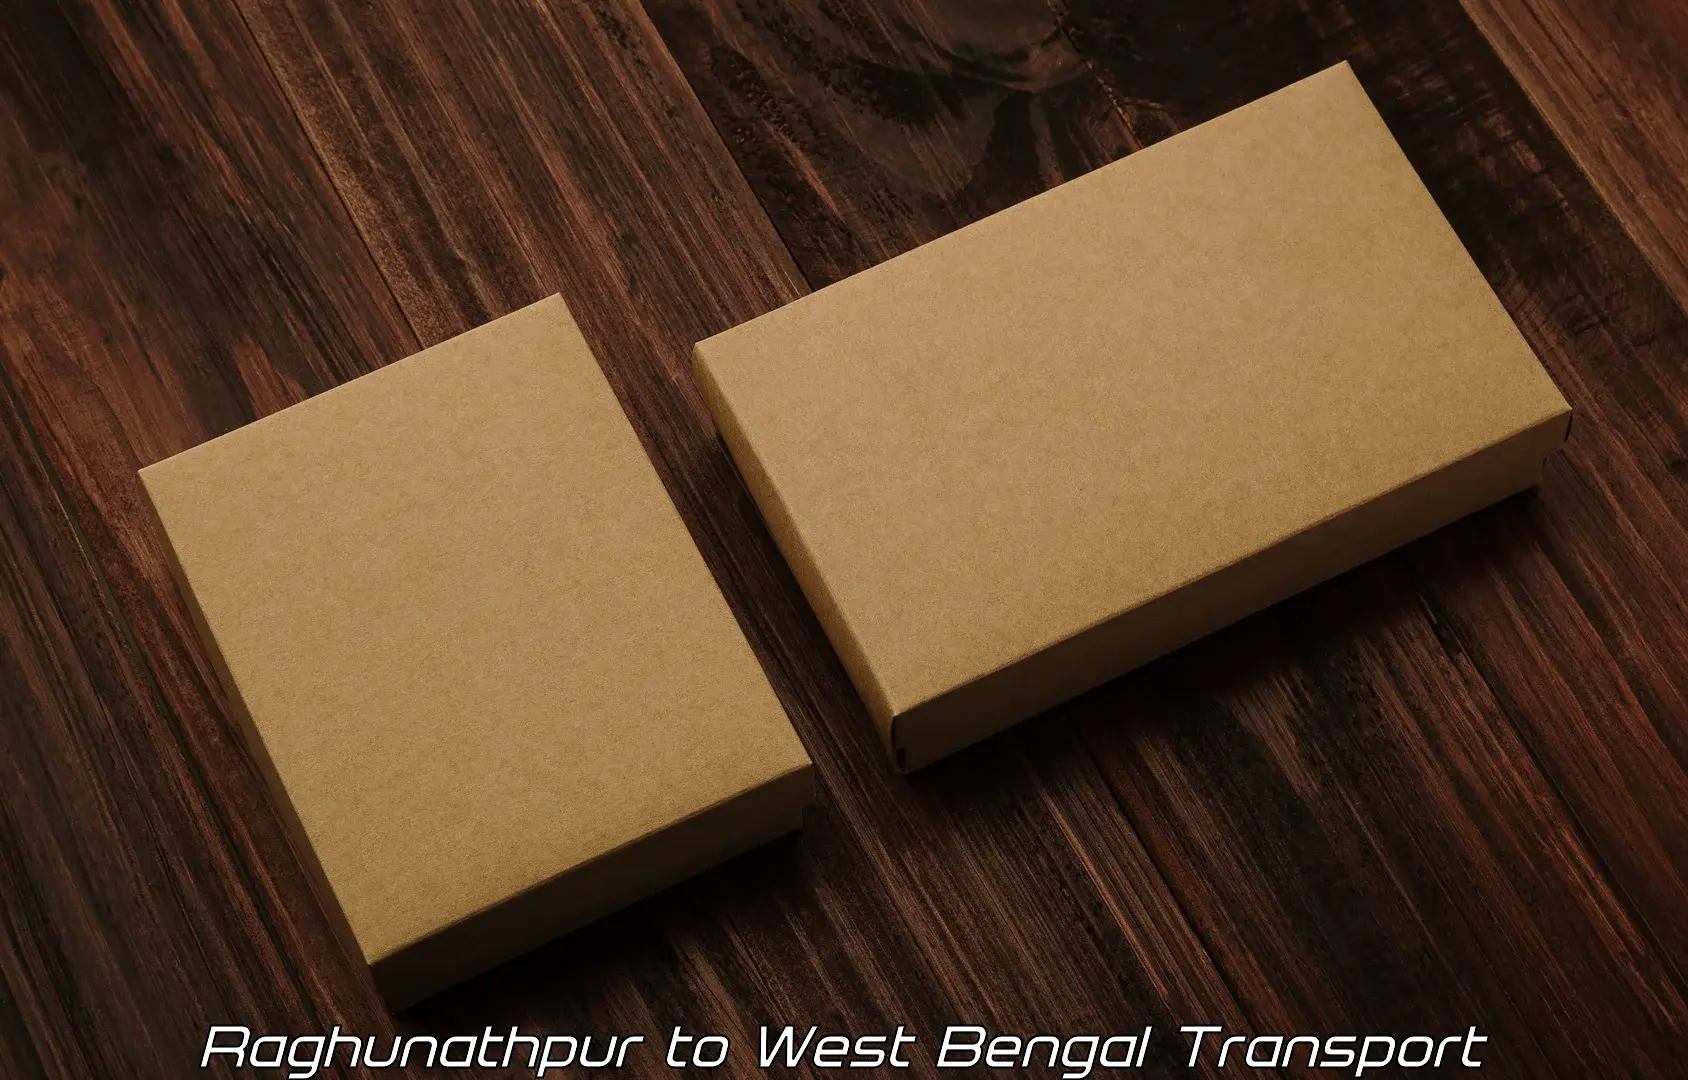 Transport shared services in Raghunathpur to Durgapur